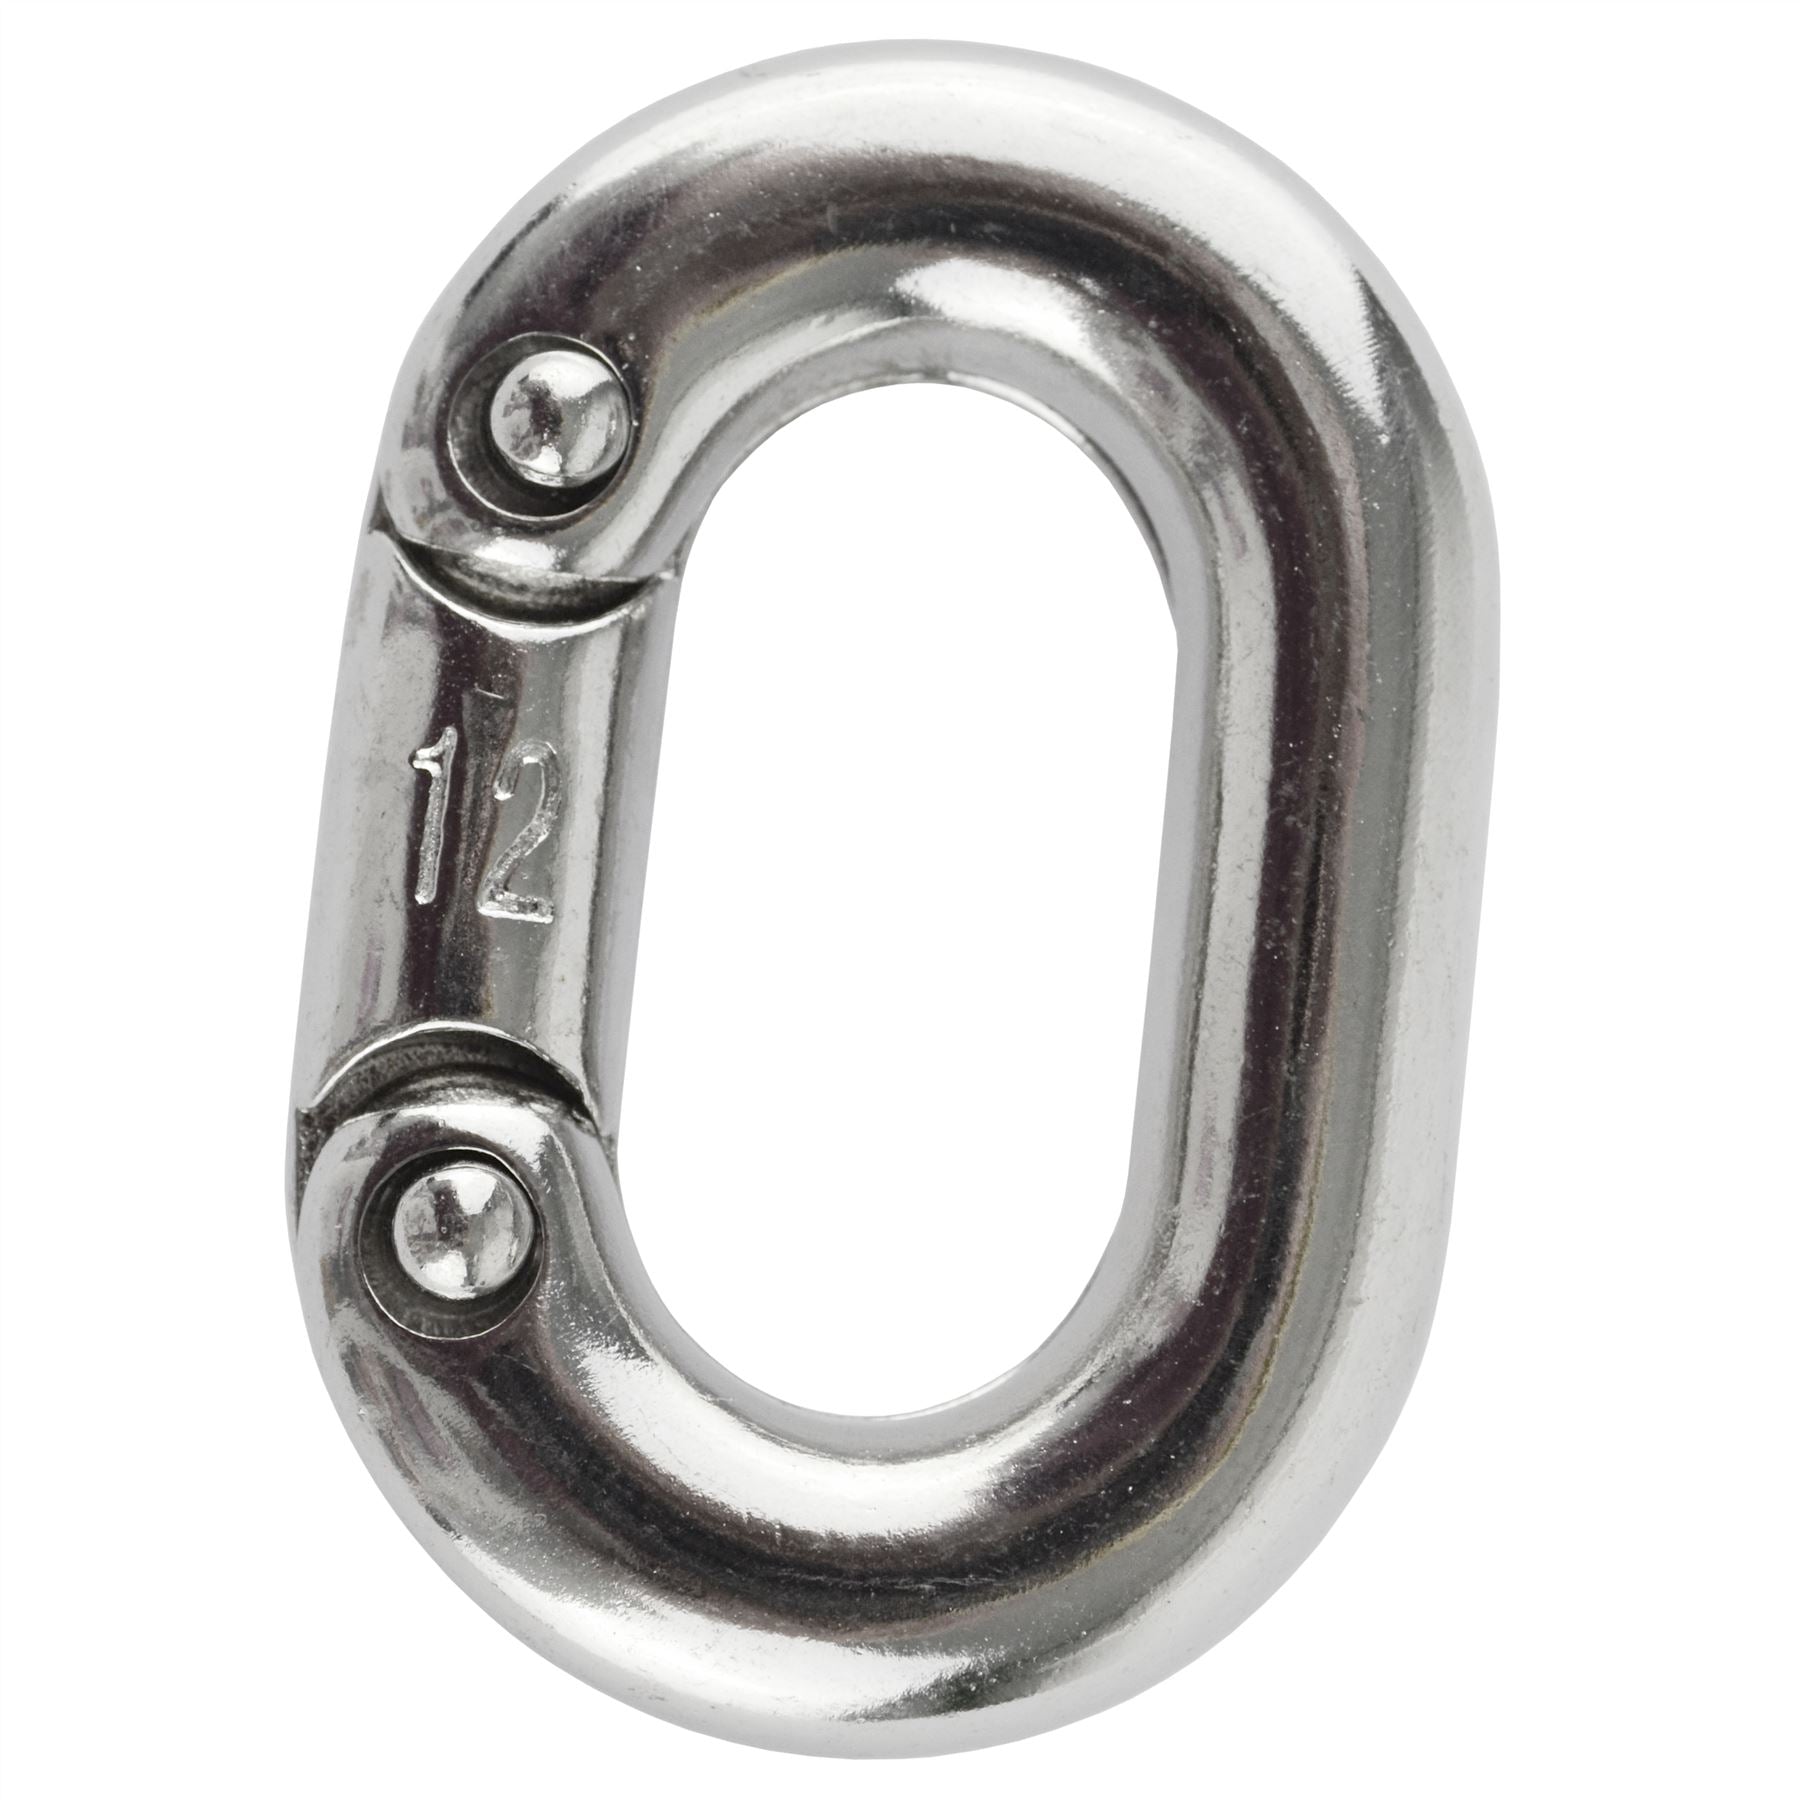 Chain Connecting Link 12mm Marine Grade Stainless Steel Split Shackle